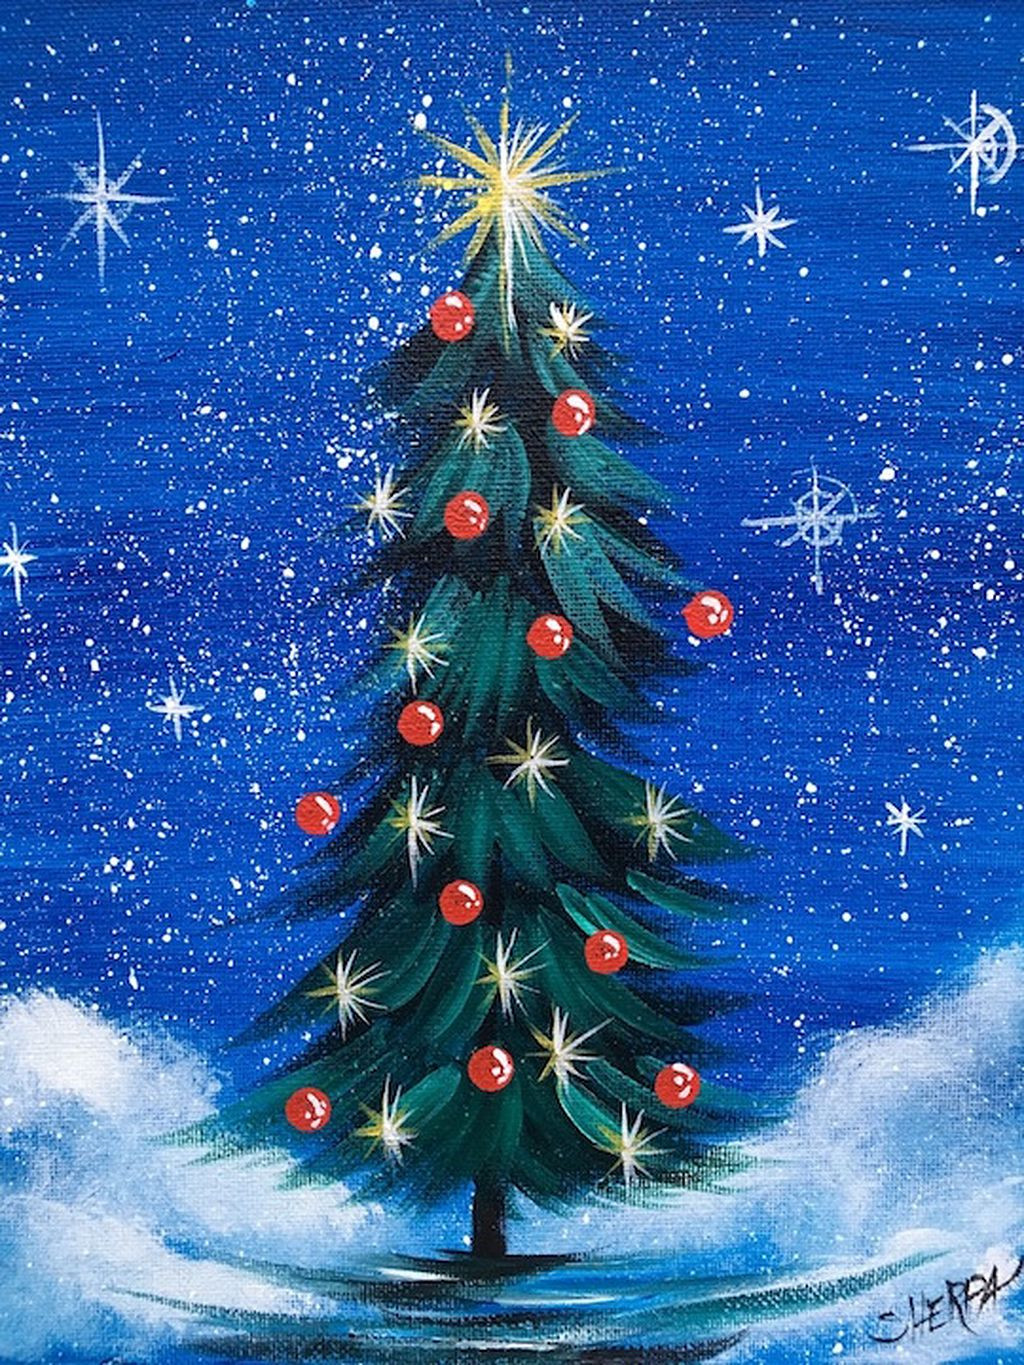 Christmas Canvas Painting Ideas
 Christmas Paintings Canvas Easy Ideas In Home 17